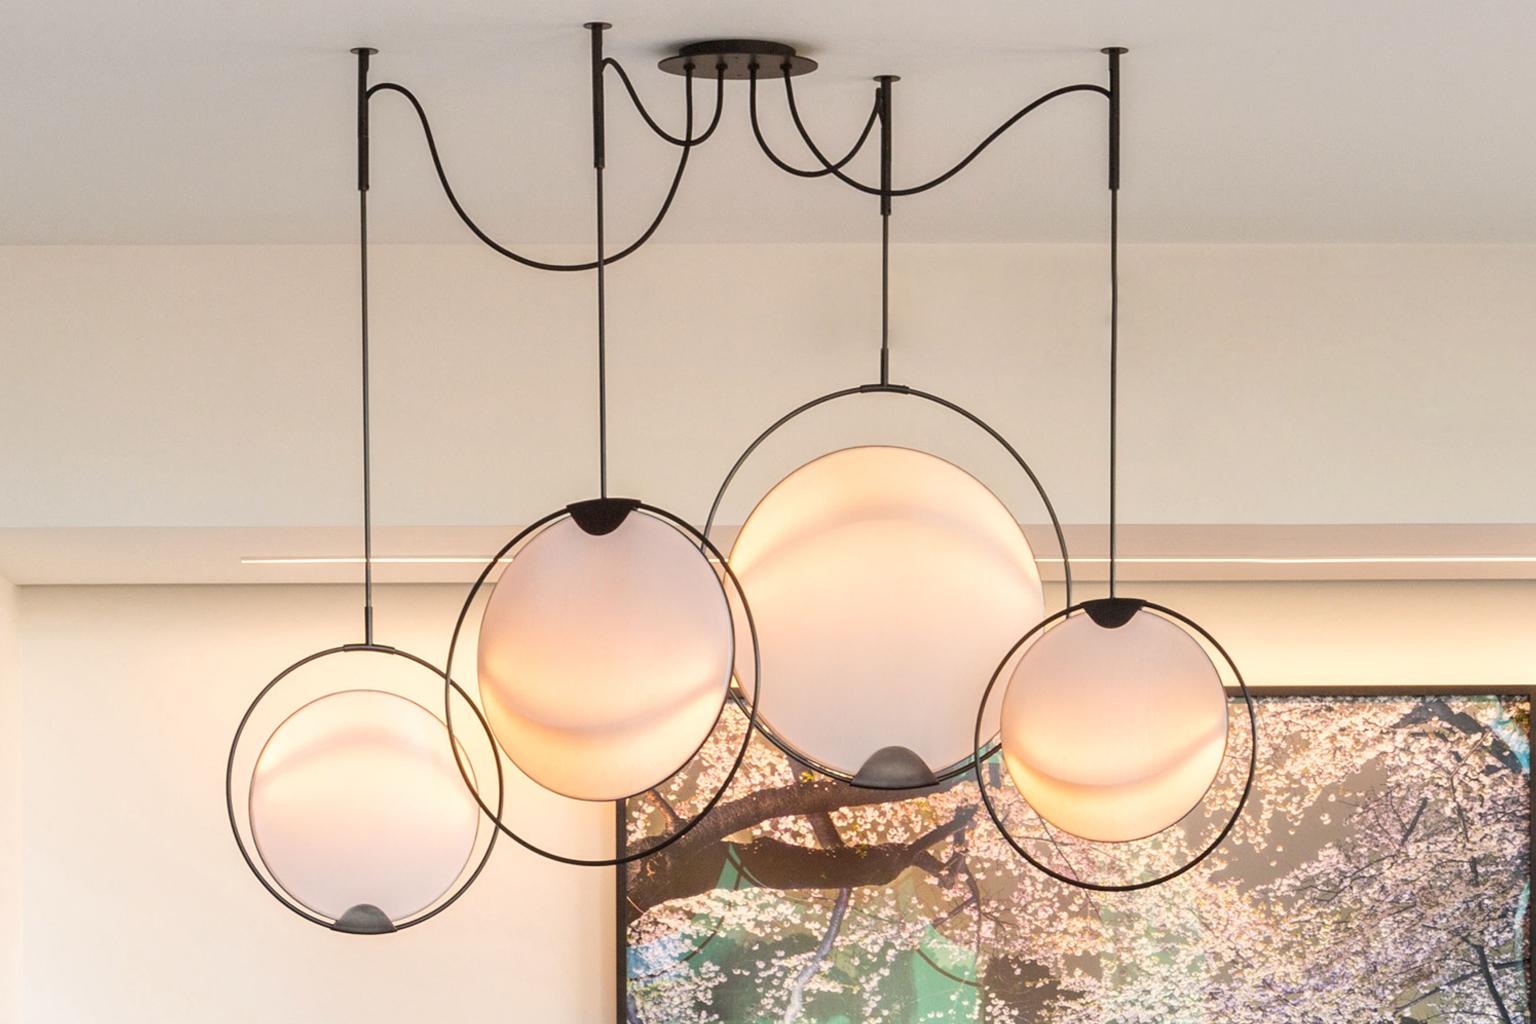 The hoop shade was inspired by the construction and dynamic motion of hoop skirts from the early 1900s. The large brass hoops rotate back and forth, and the shades rotate within those hoops, allowing the user to adjust the light to their needs.